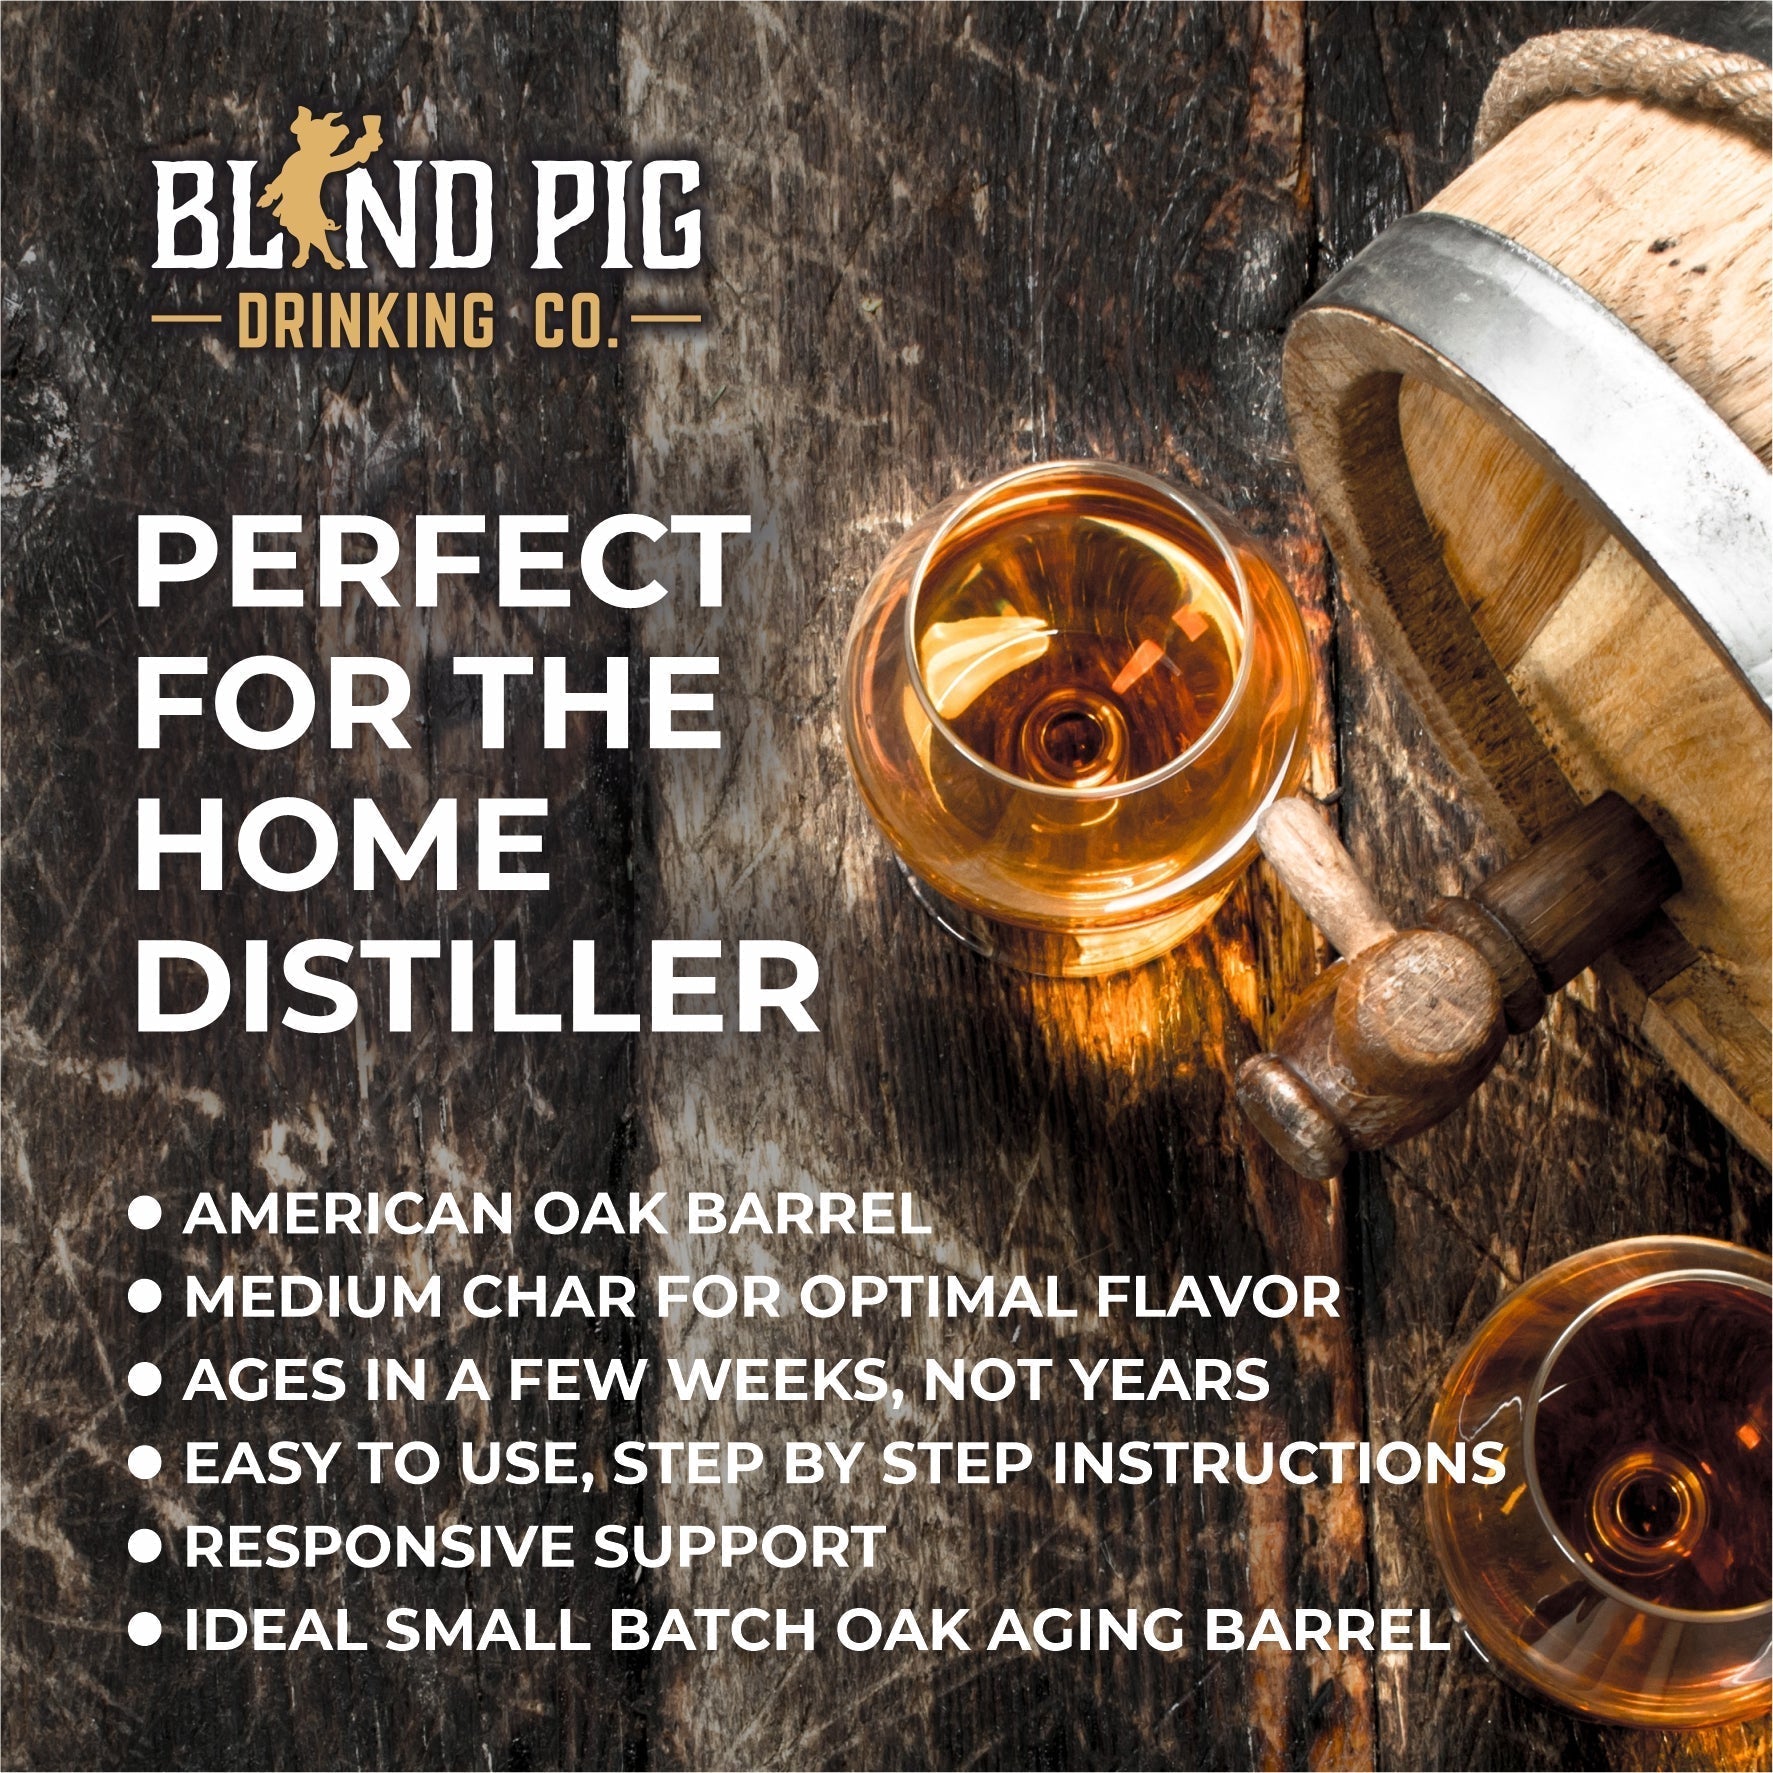 Personalized Tequila Barrel + Tequila Making Kit | The Home Distiller's Choice for DIY Spirits | Distilling Co. Series - Blind Pig Drinking Co.